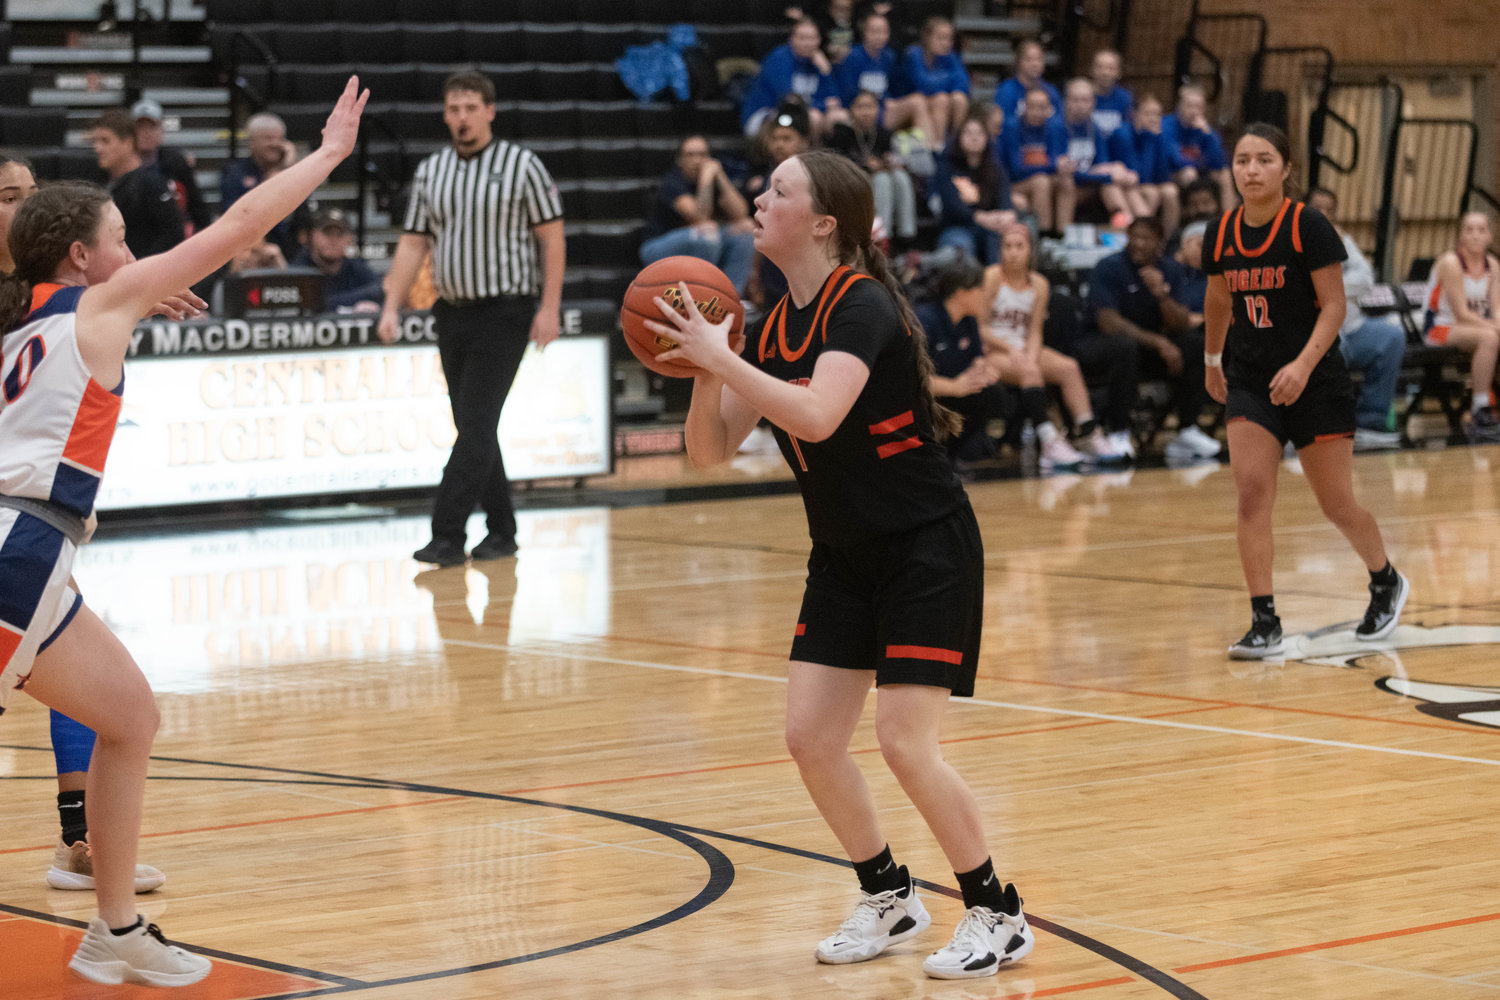 Gracie Schofield winds up for a shot during the second half of of Centralia's 54-37 loss to Lakes on Dec. 30.